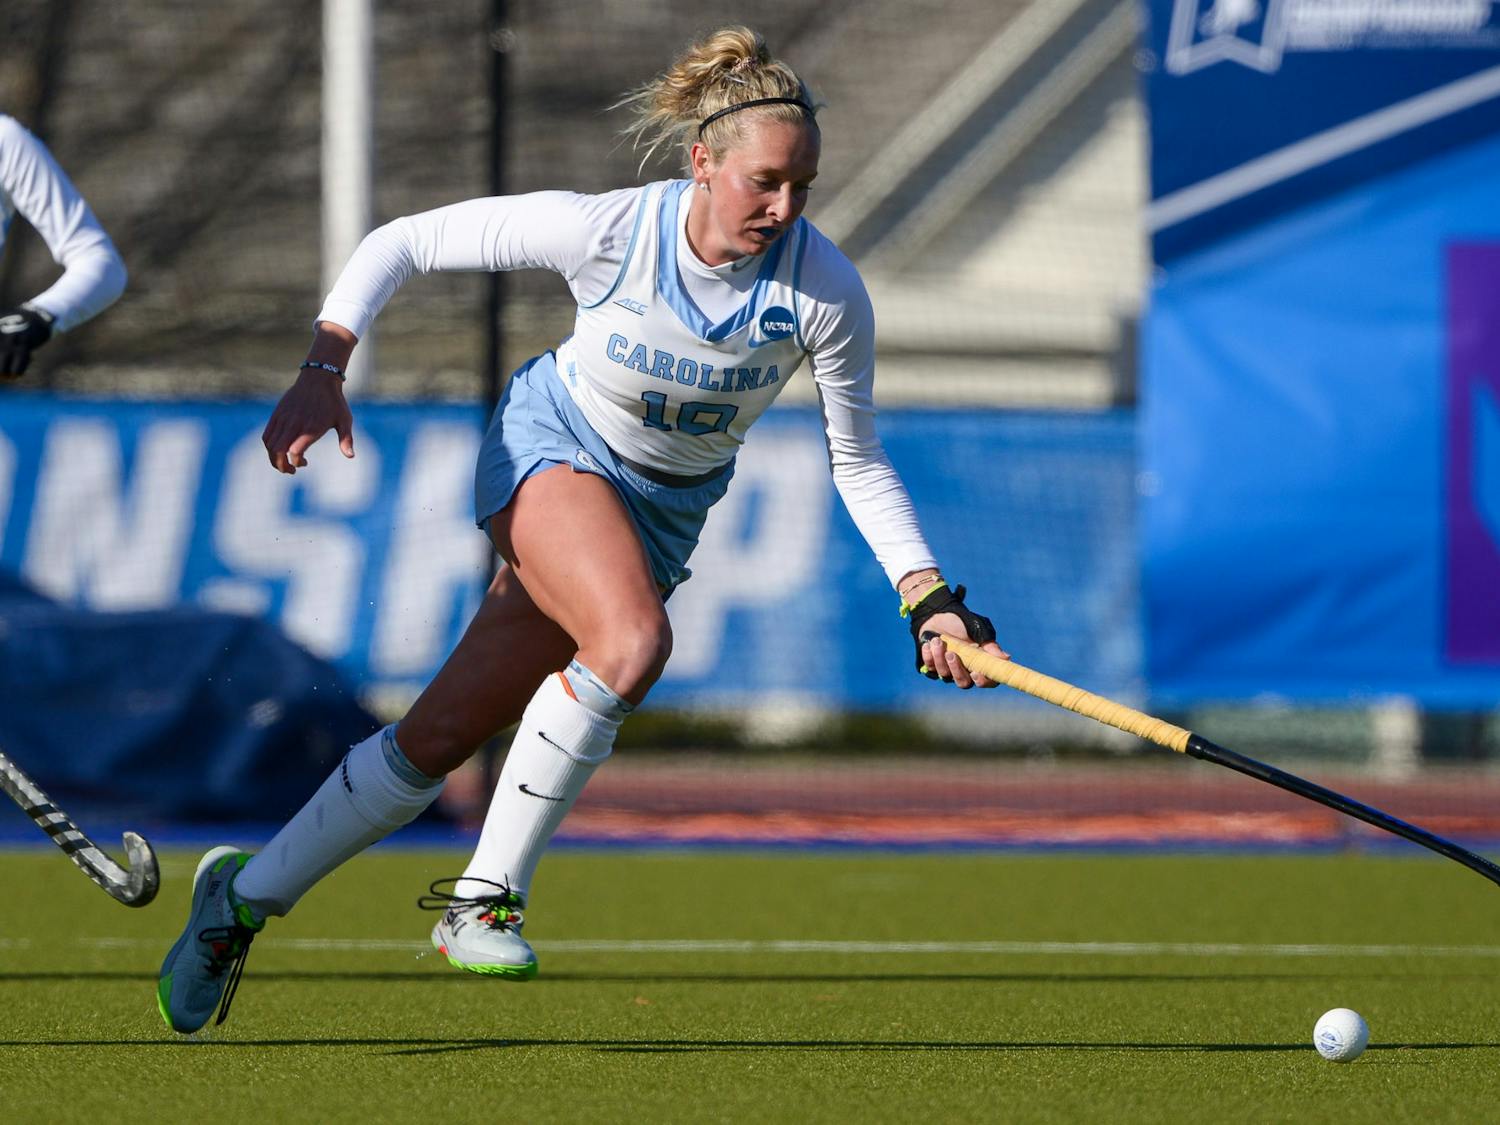 UNC senior forward Paityn Wirth (10) drives the ball during the second quarter of the field hockey game against Penn State on Friday, Nov. 18, 2022, at the George J. Sherman Sports Complex in Storrs, Conn. UNC beat Penn State 3-0.